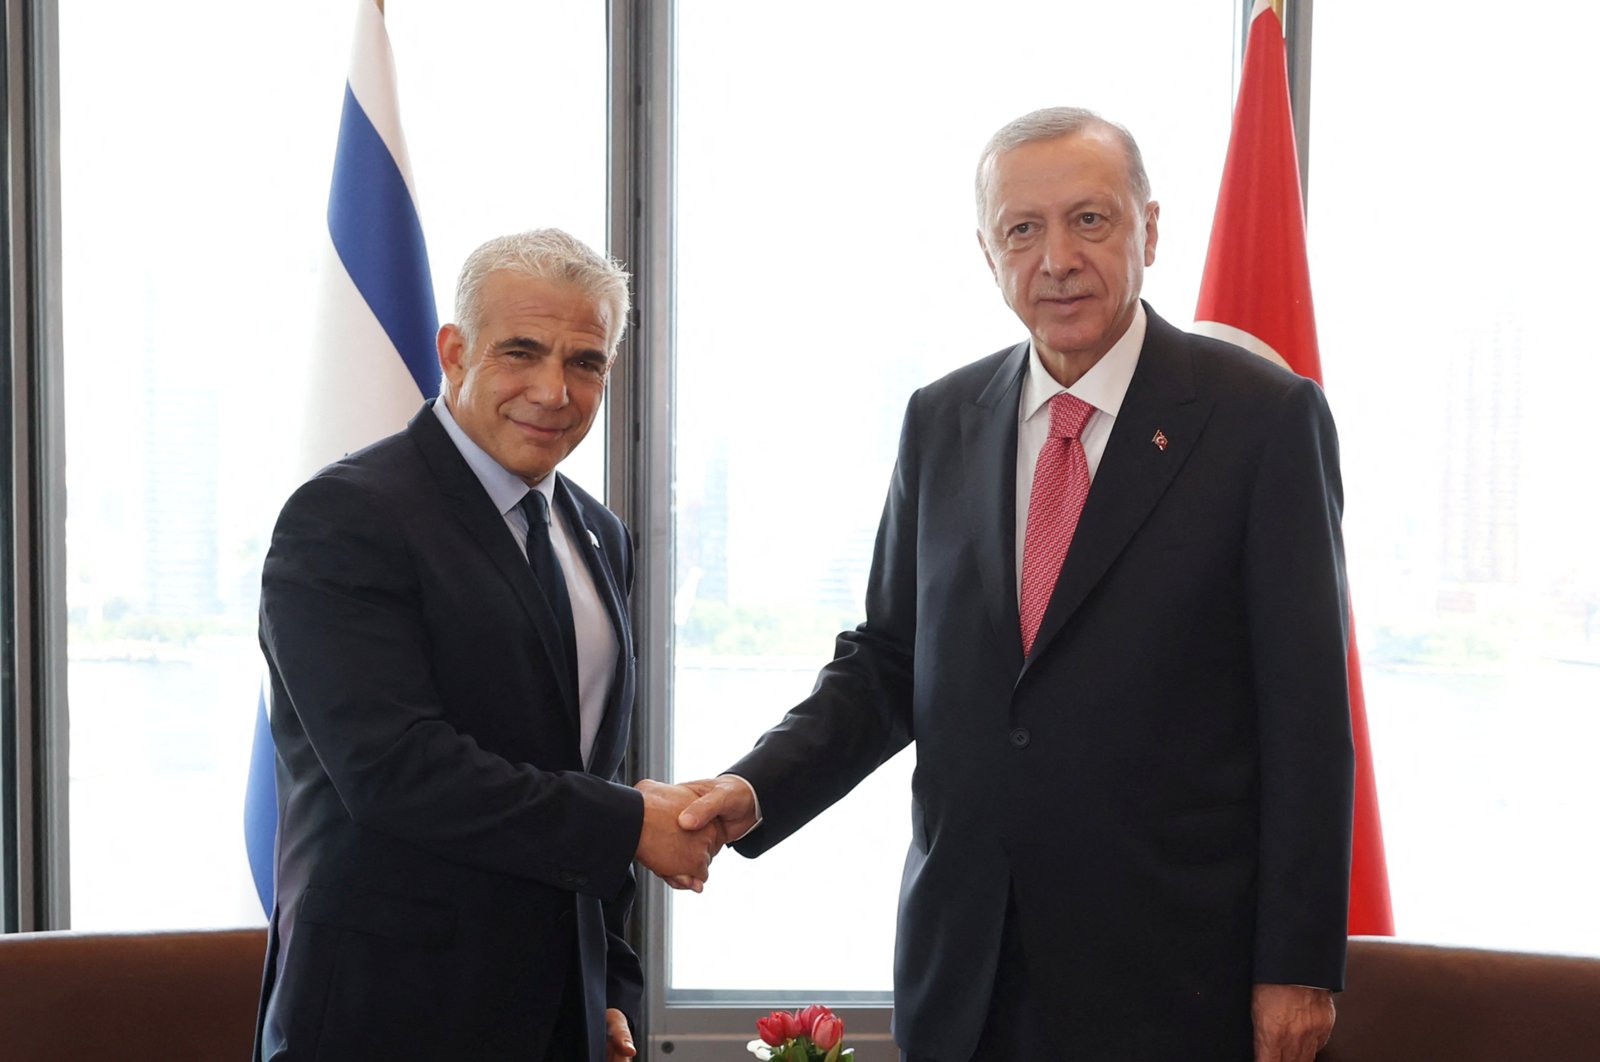 President Recep Tayyip Erdoğan meets with Israeli Prime Minister Yair Lapid on the sidelines of the U.N. General Assembly, in New York City, U.S., Sept. 20, 2022. (Reuters Photo)